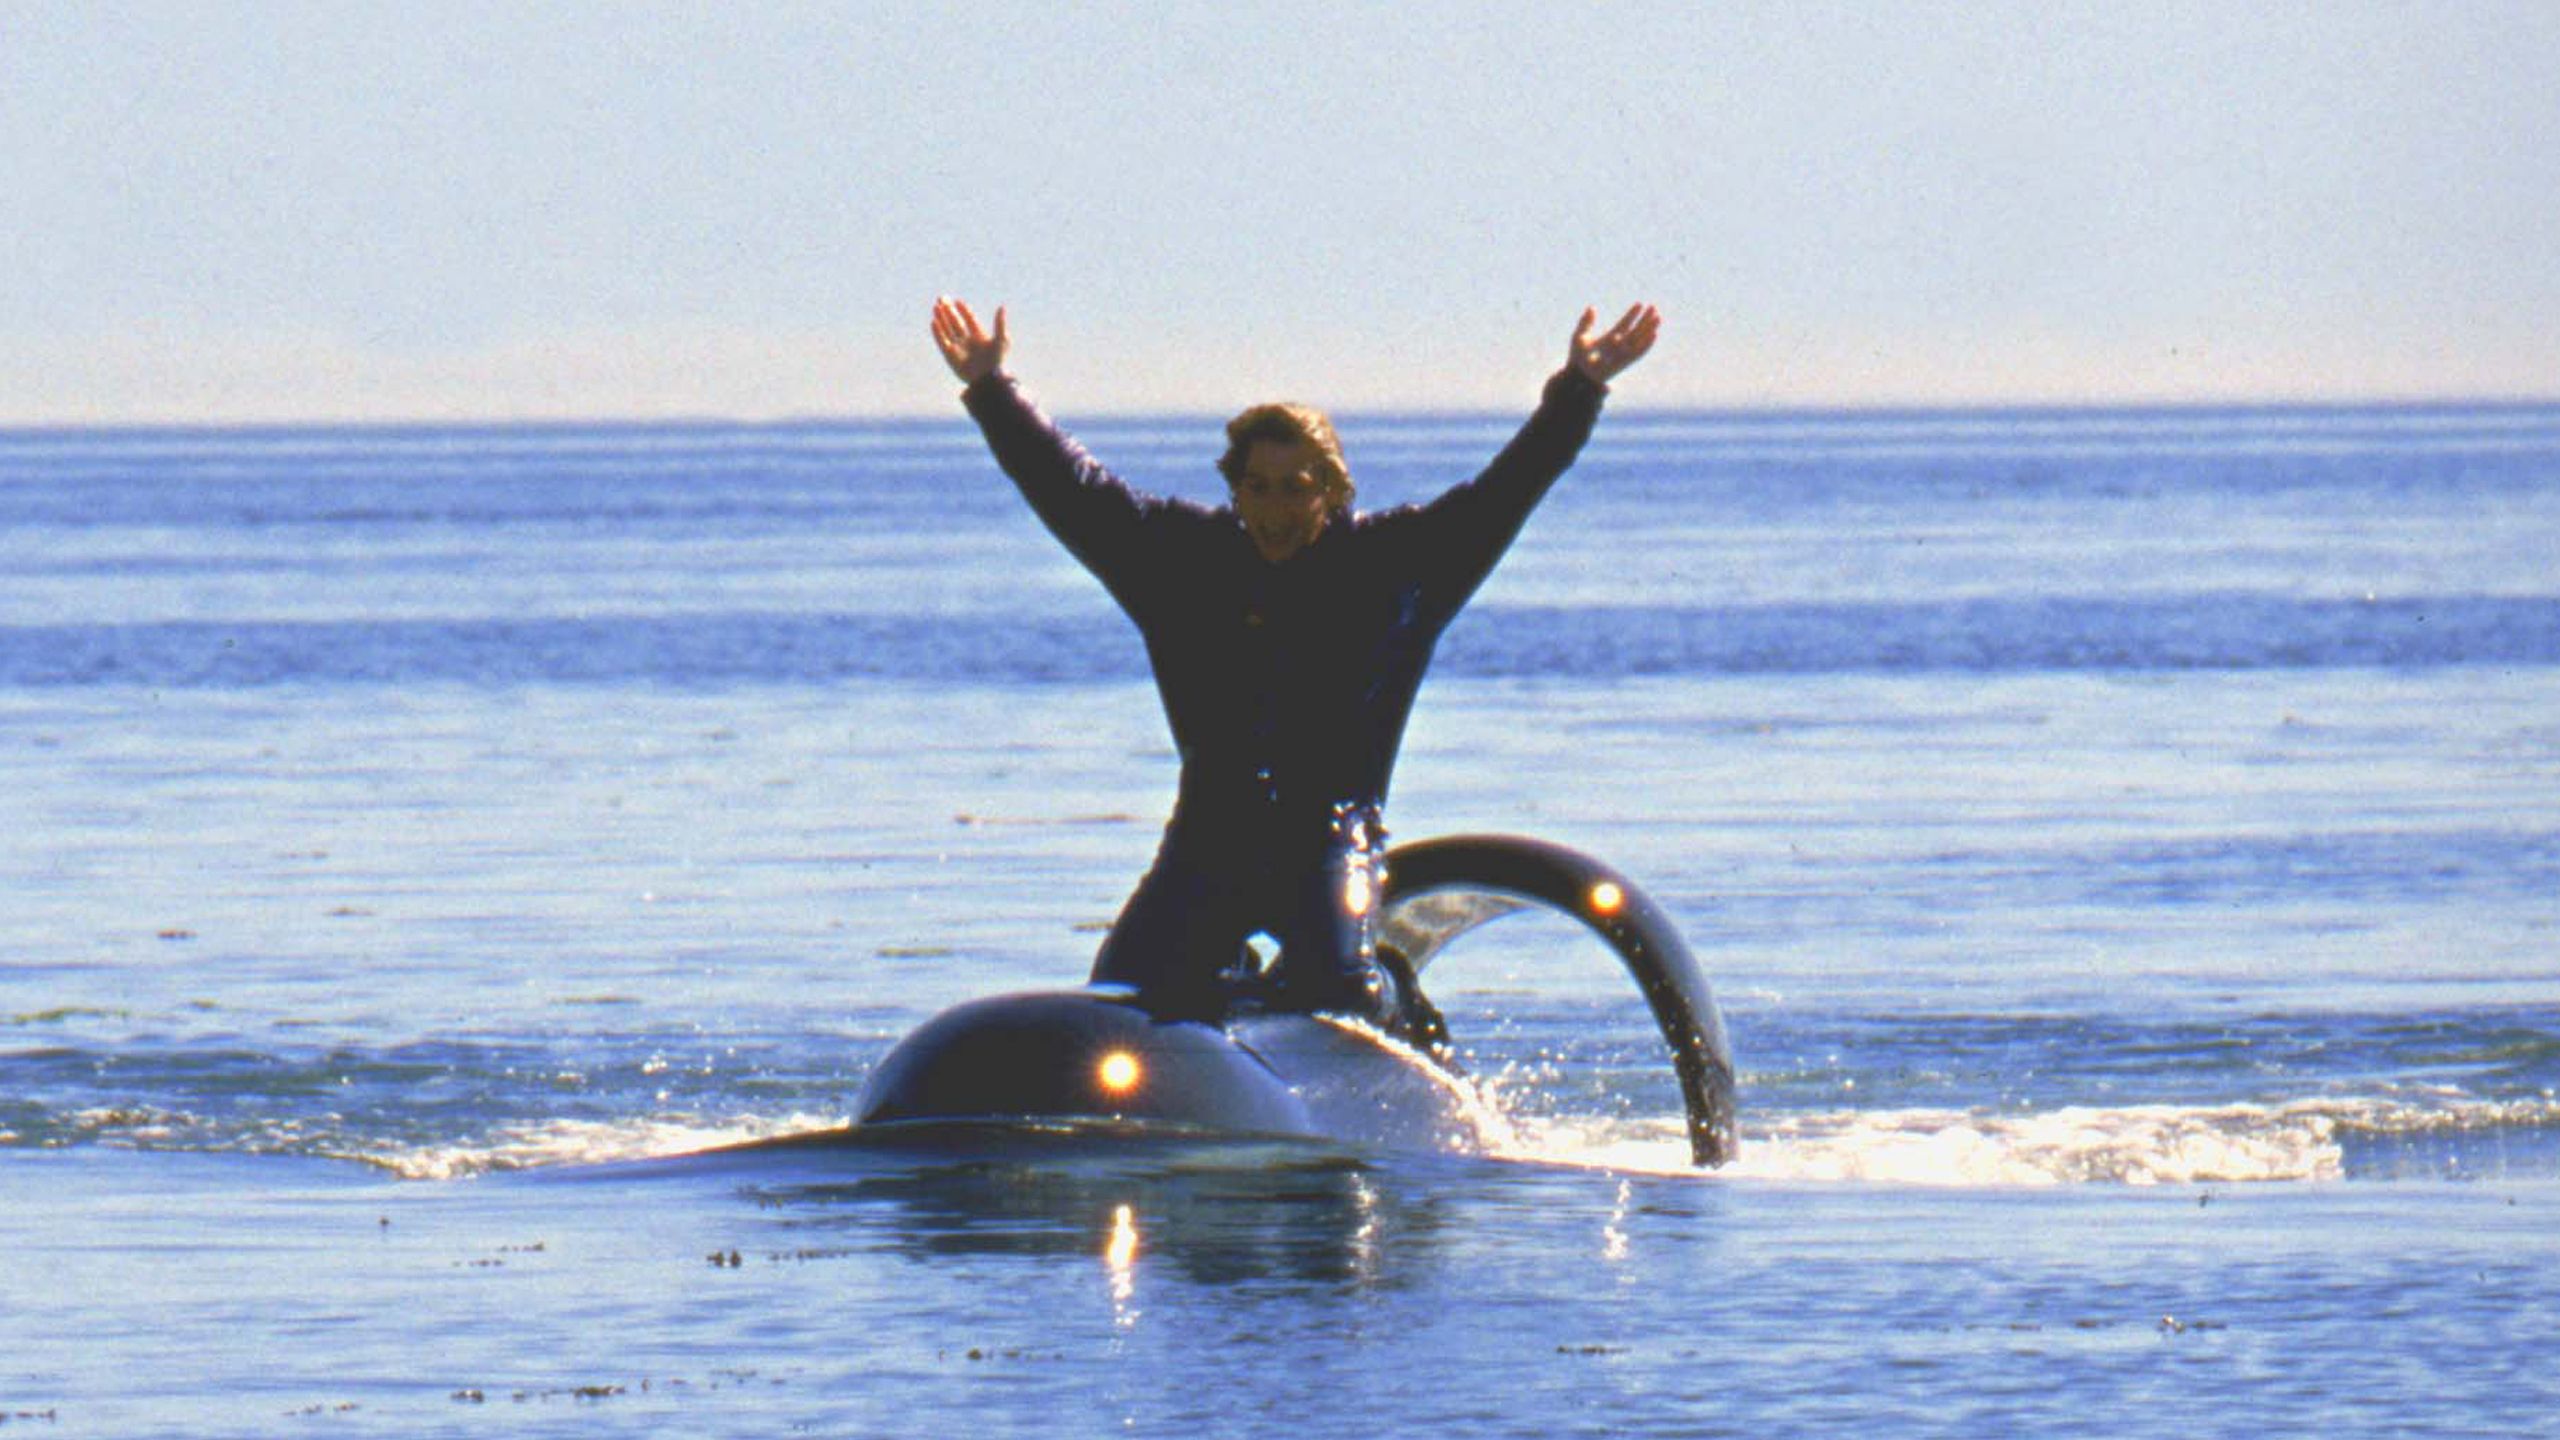 free willy 2 online free full movie